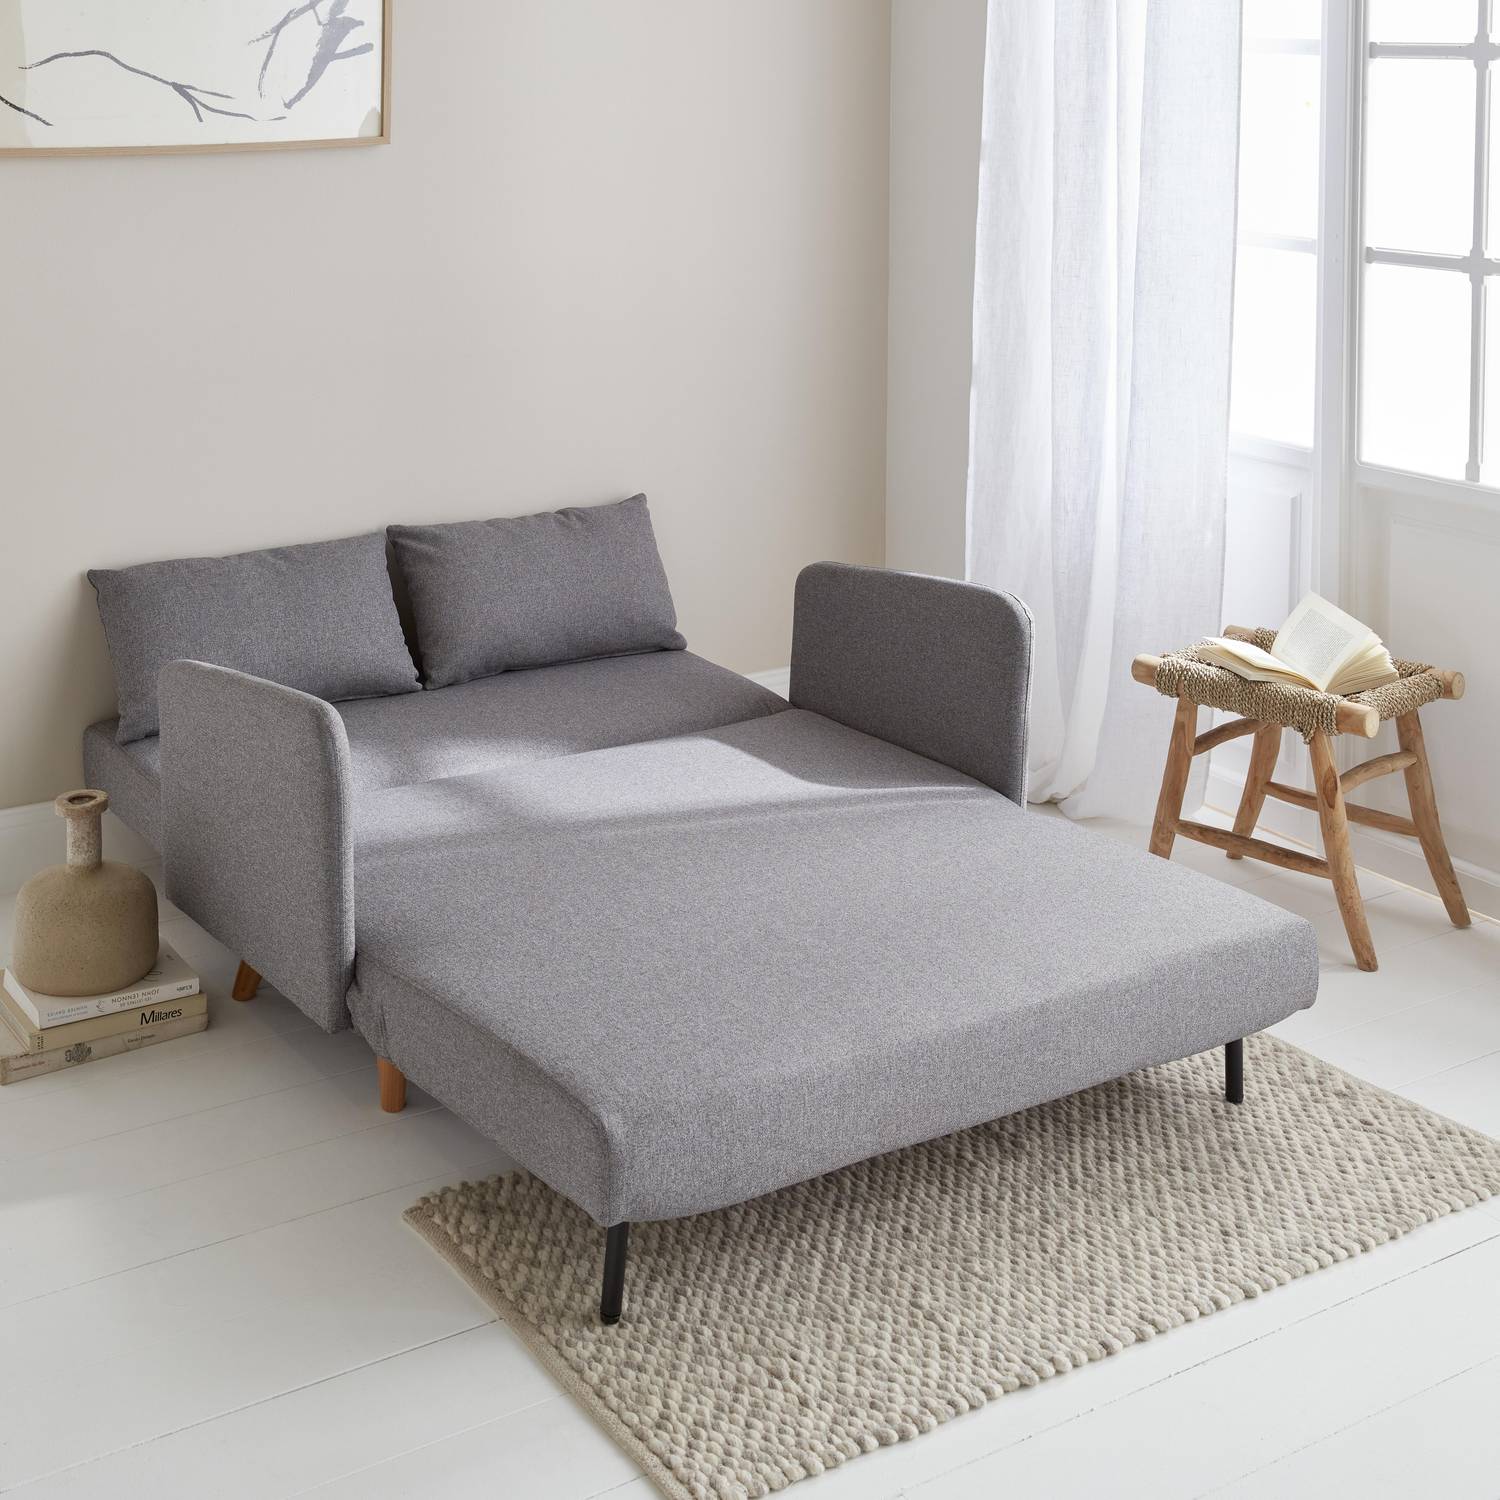 2-Seater convertible sofa with wooden legs, L130 x l81 x H82cm, grey Photo2